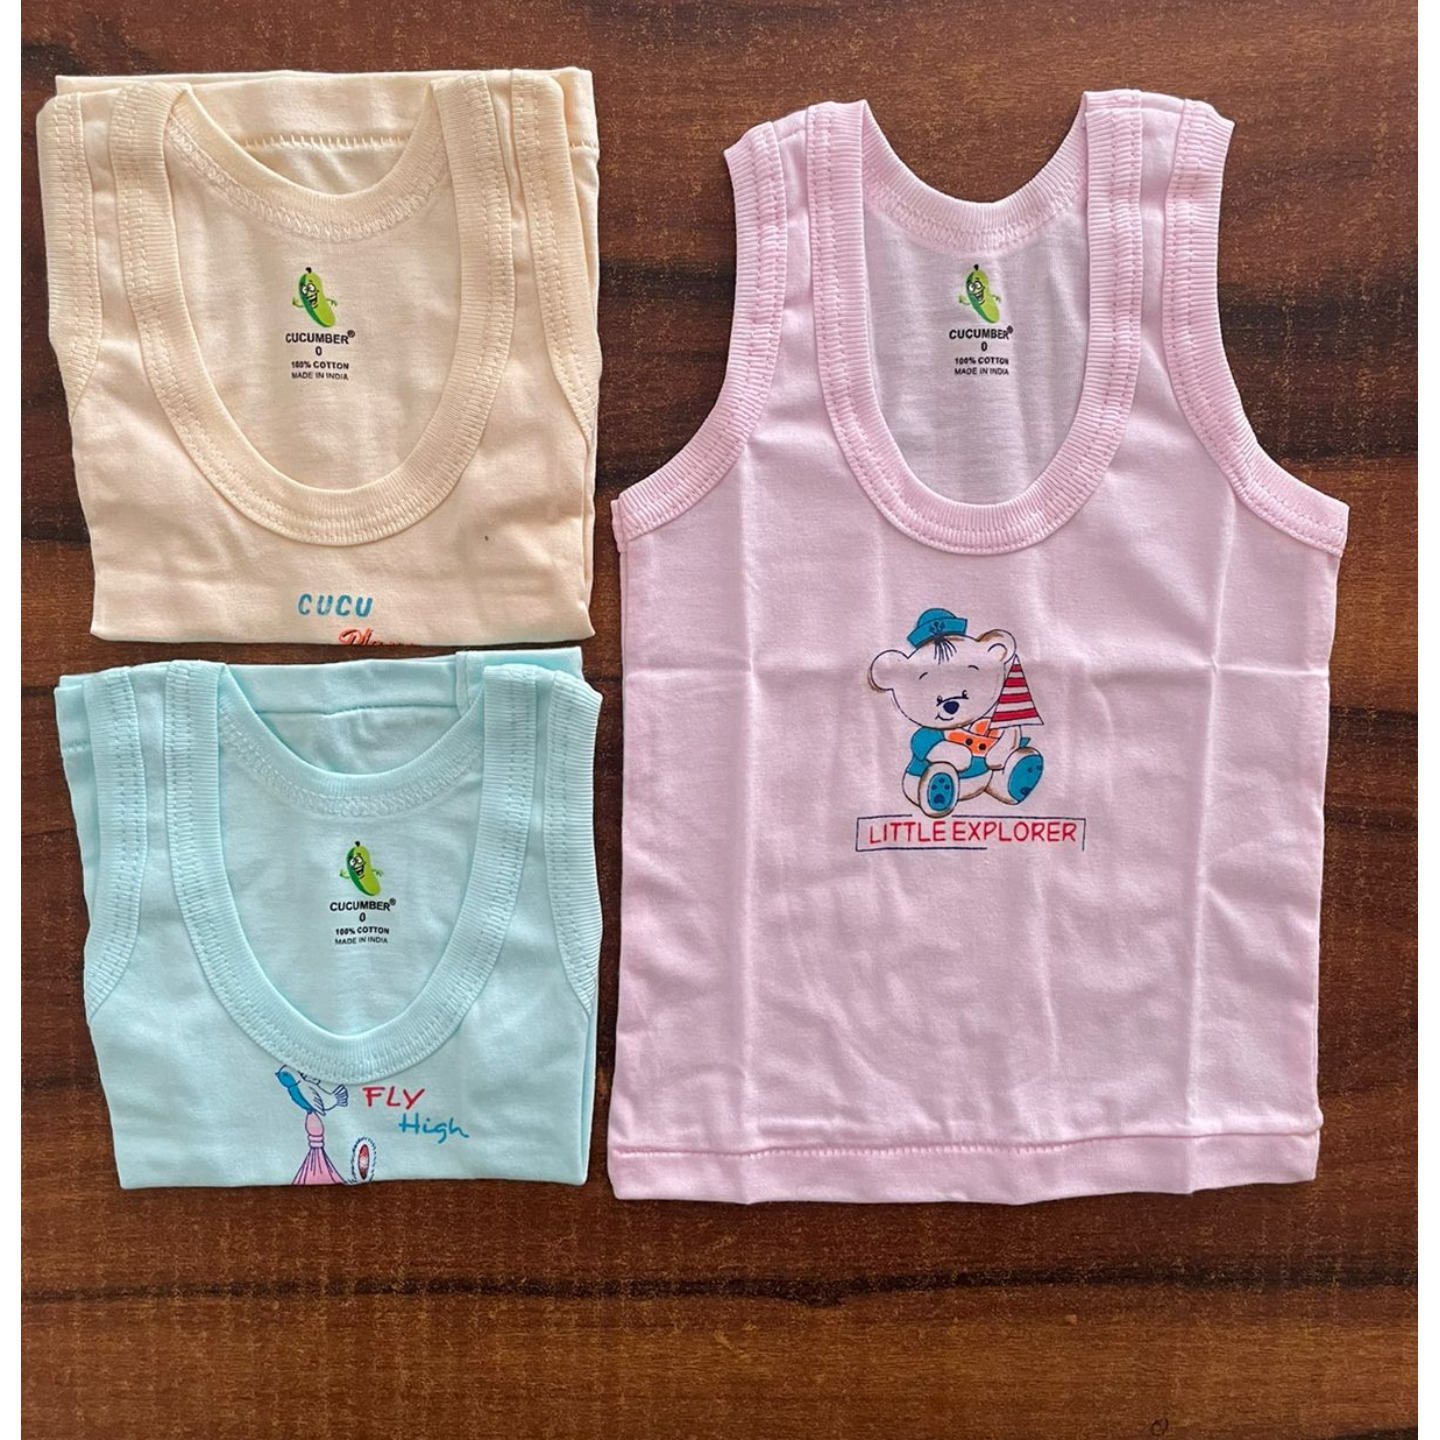 Cucumber New Born Vests Pack of 3 Just RS 175